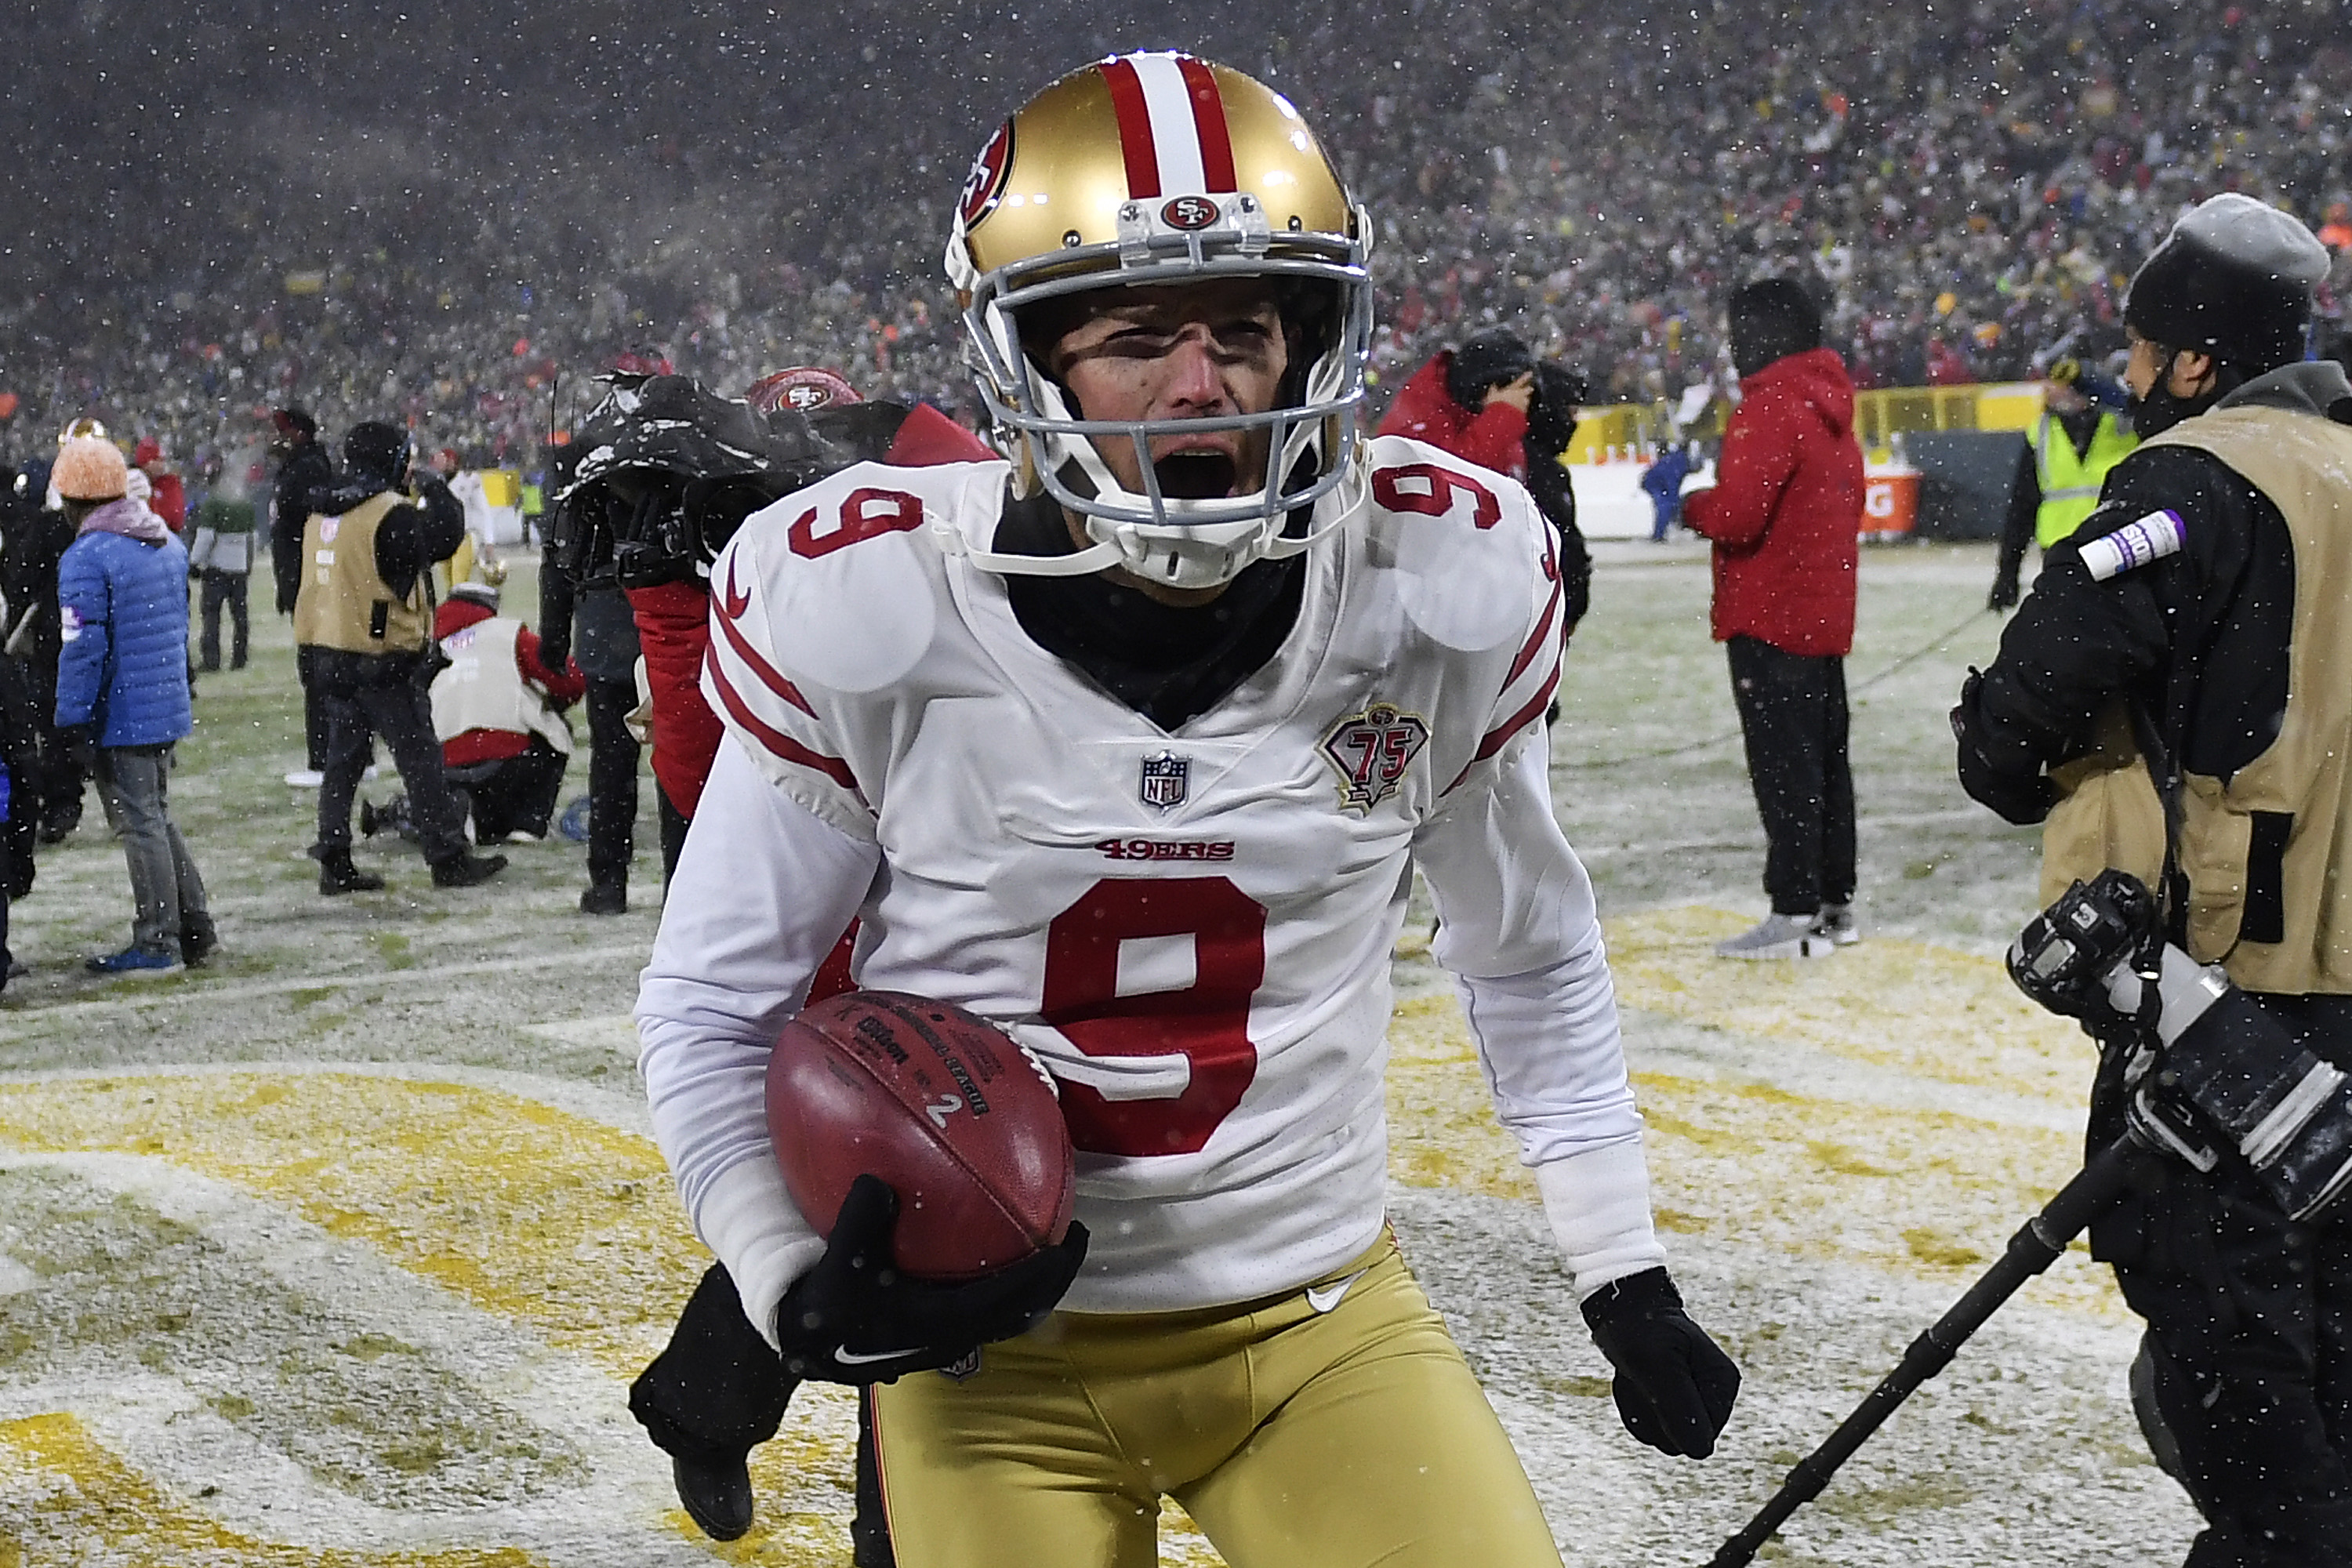 Robbie Gould kicked the 49ers into the Conference Championship Game